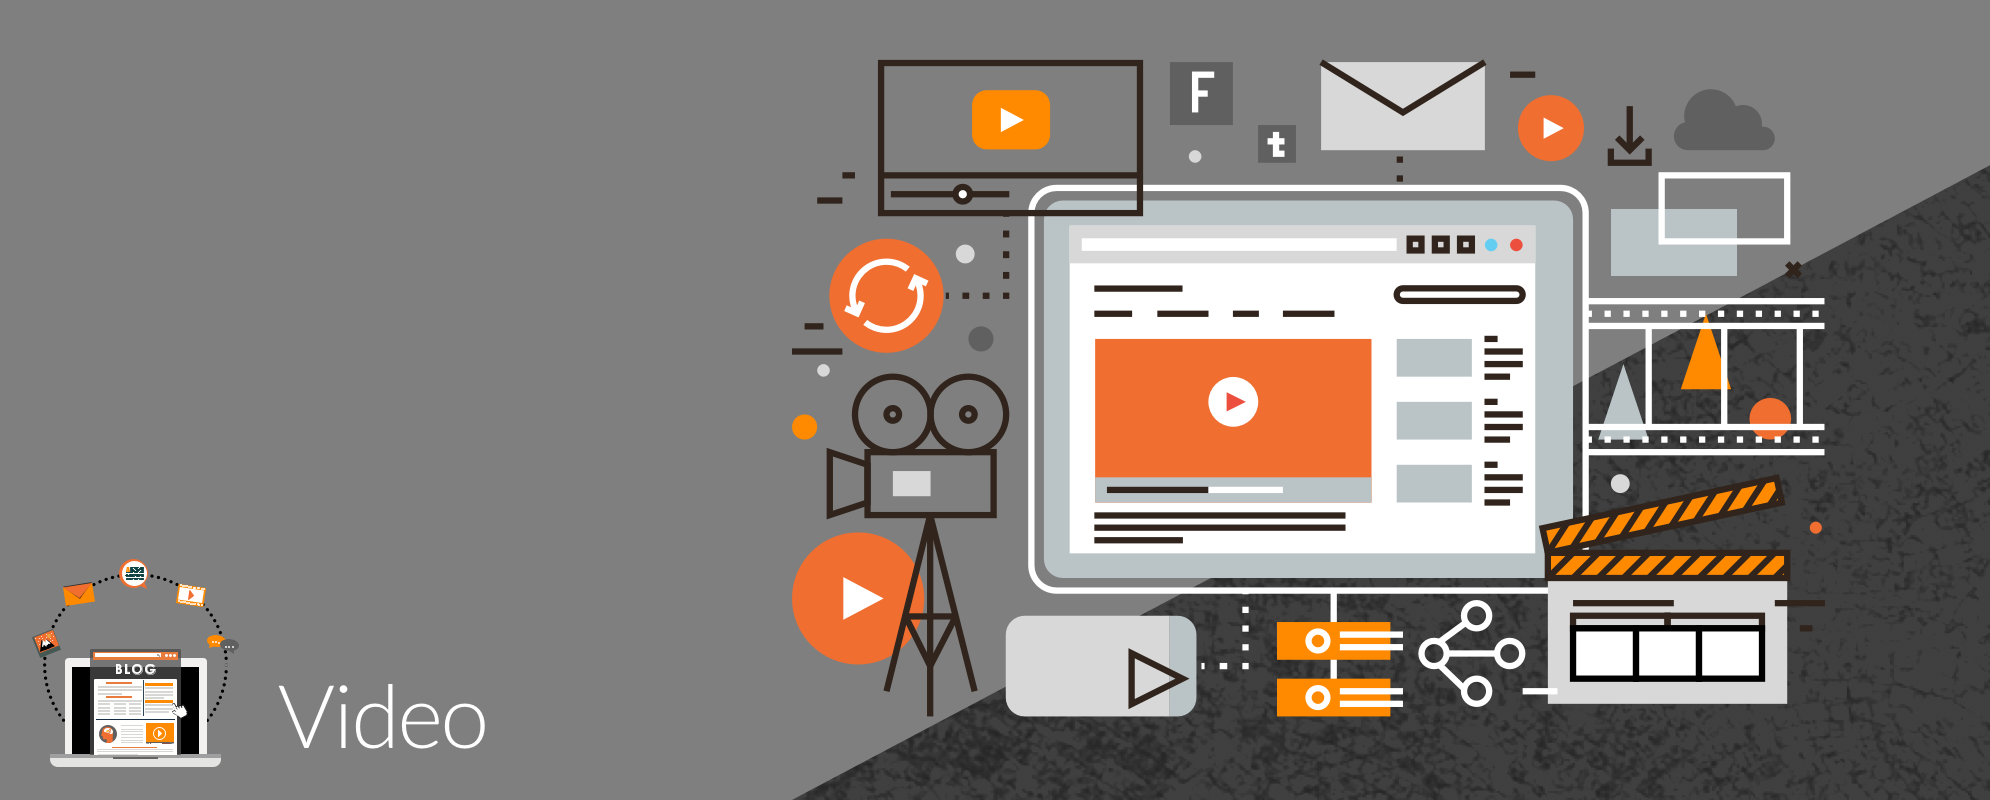 How to Use Video in SaaS Marketing 